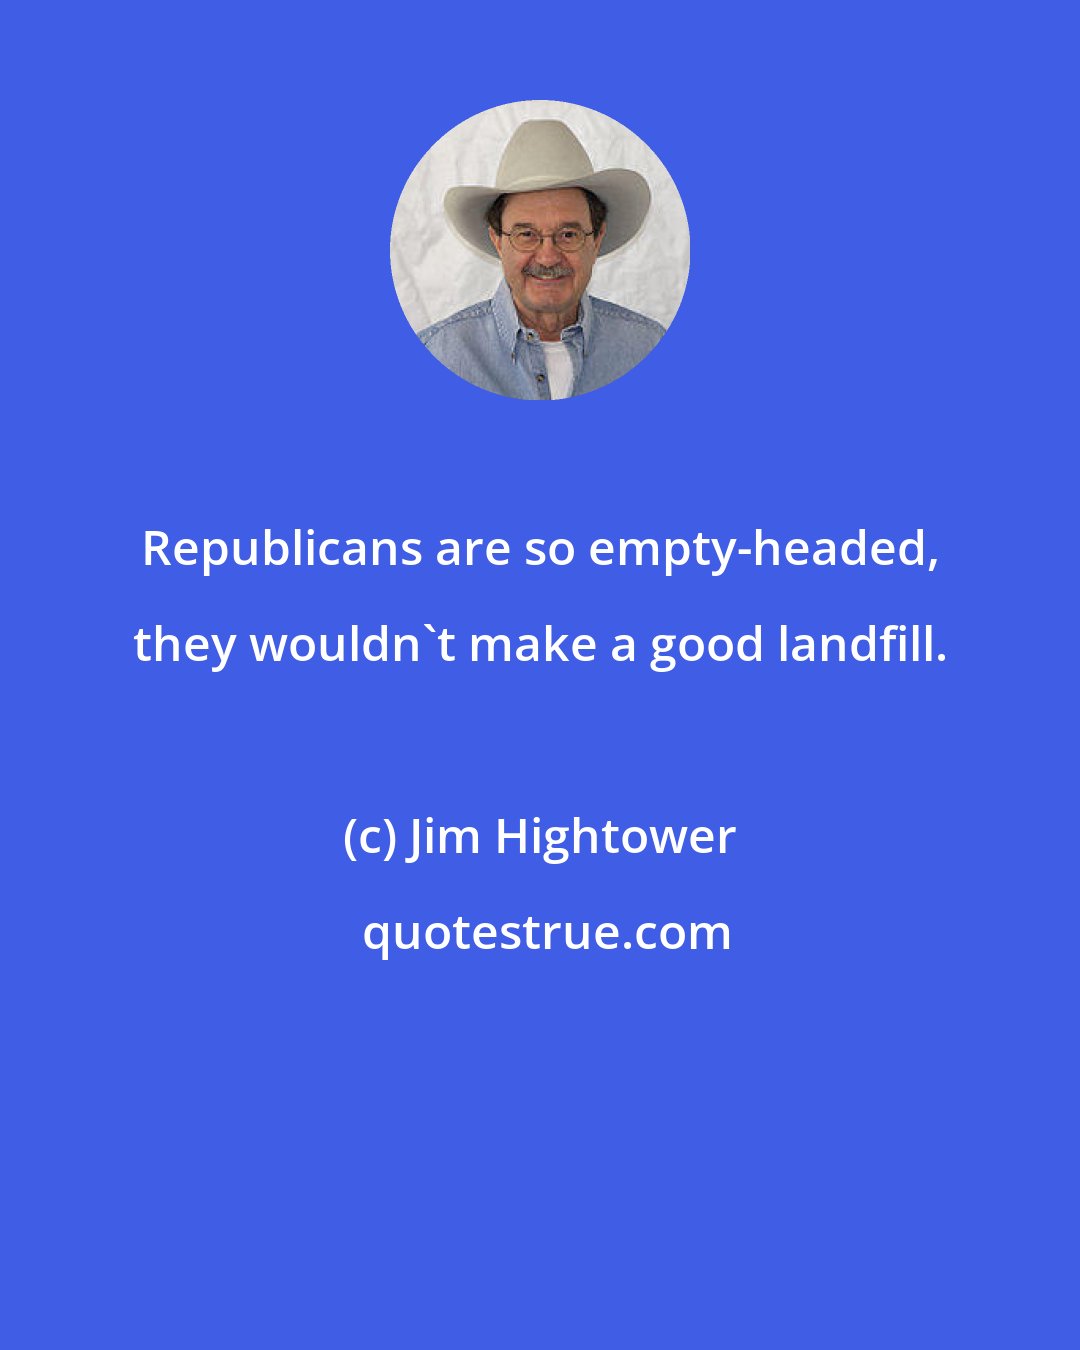 Jim Hightower: Republicans are so empty-headed, they wouldn't make a good landfill.